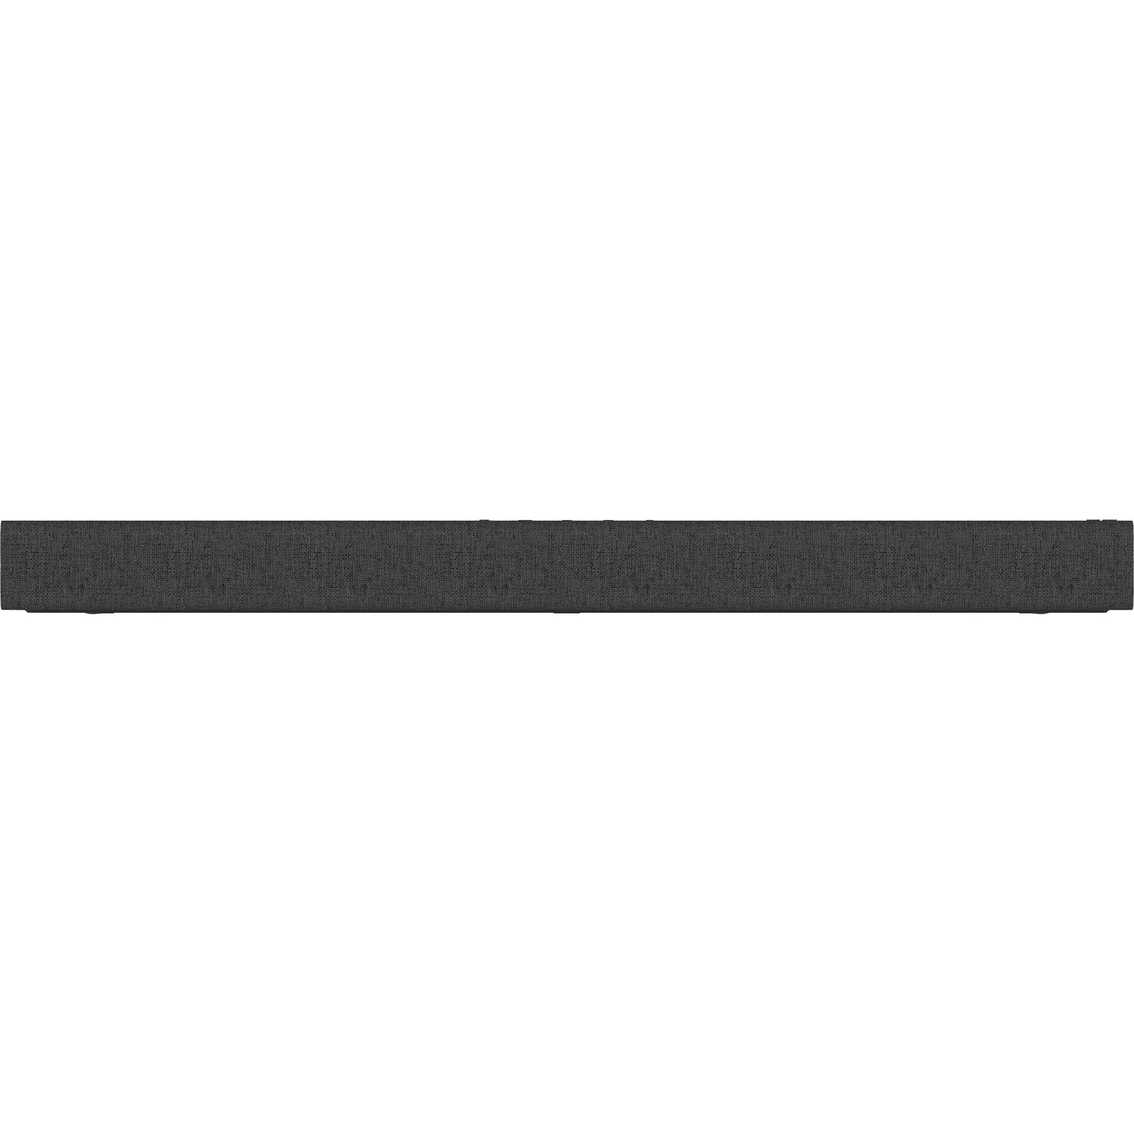 LG SP2 2.1 Channel 100W Sound Bar with Bluetooth and Built-In Subwoofer